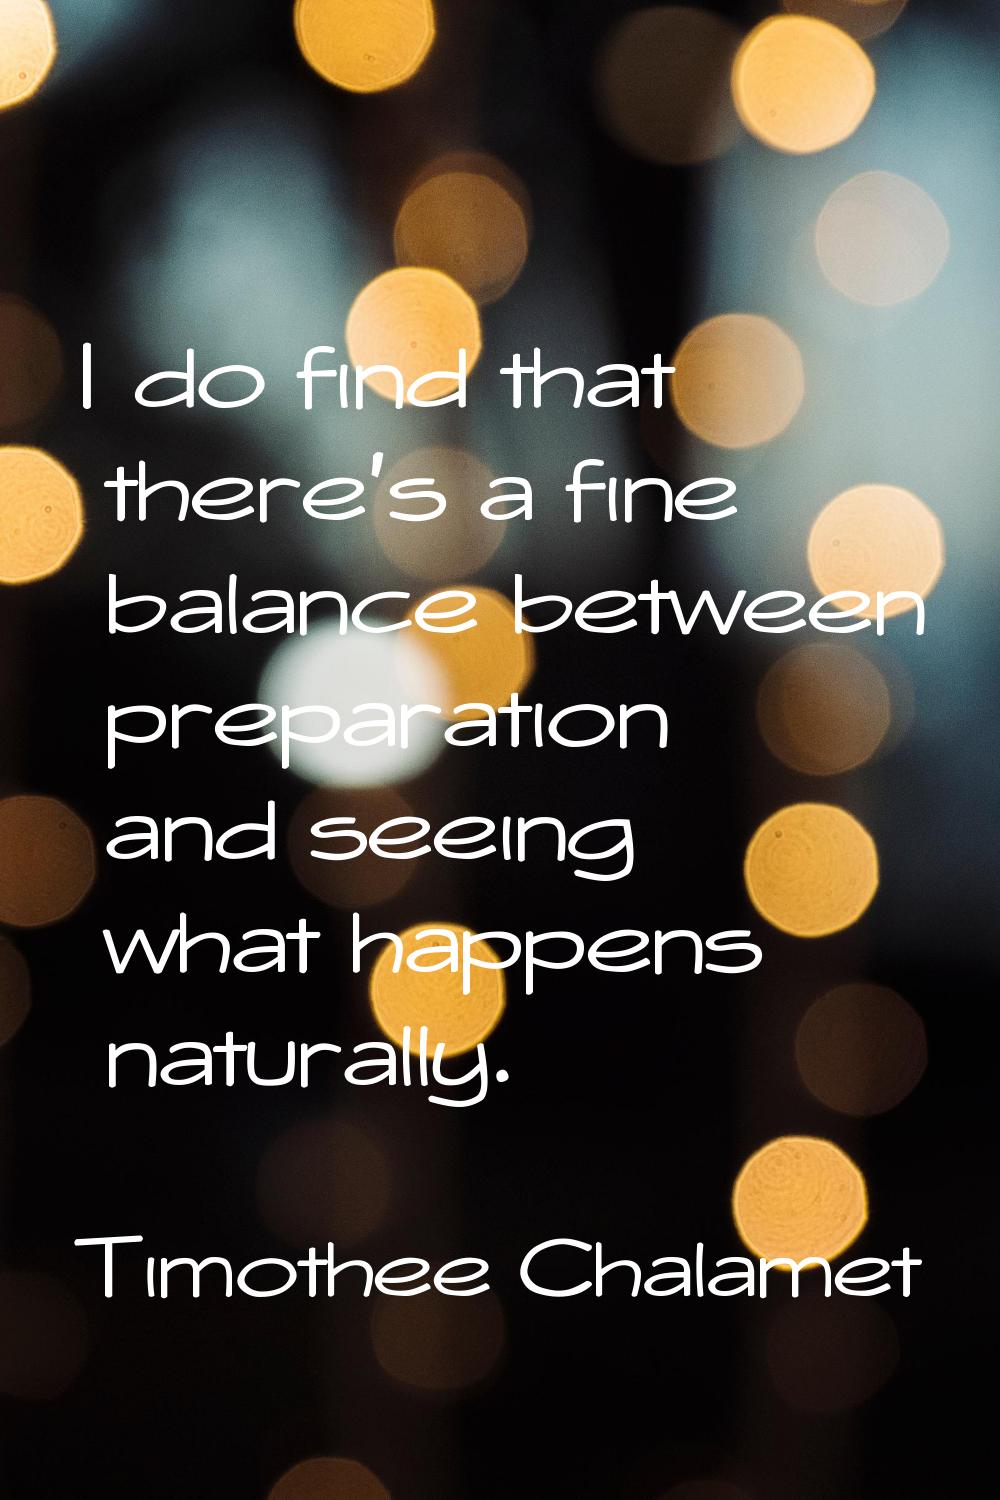 I do find that there's a fine balance between preparation and seeing what happens naturally.